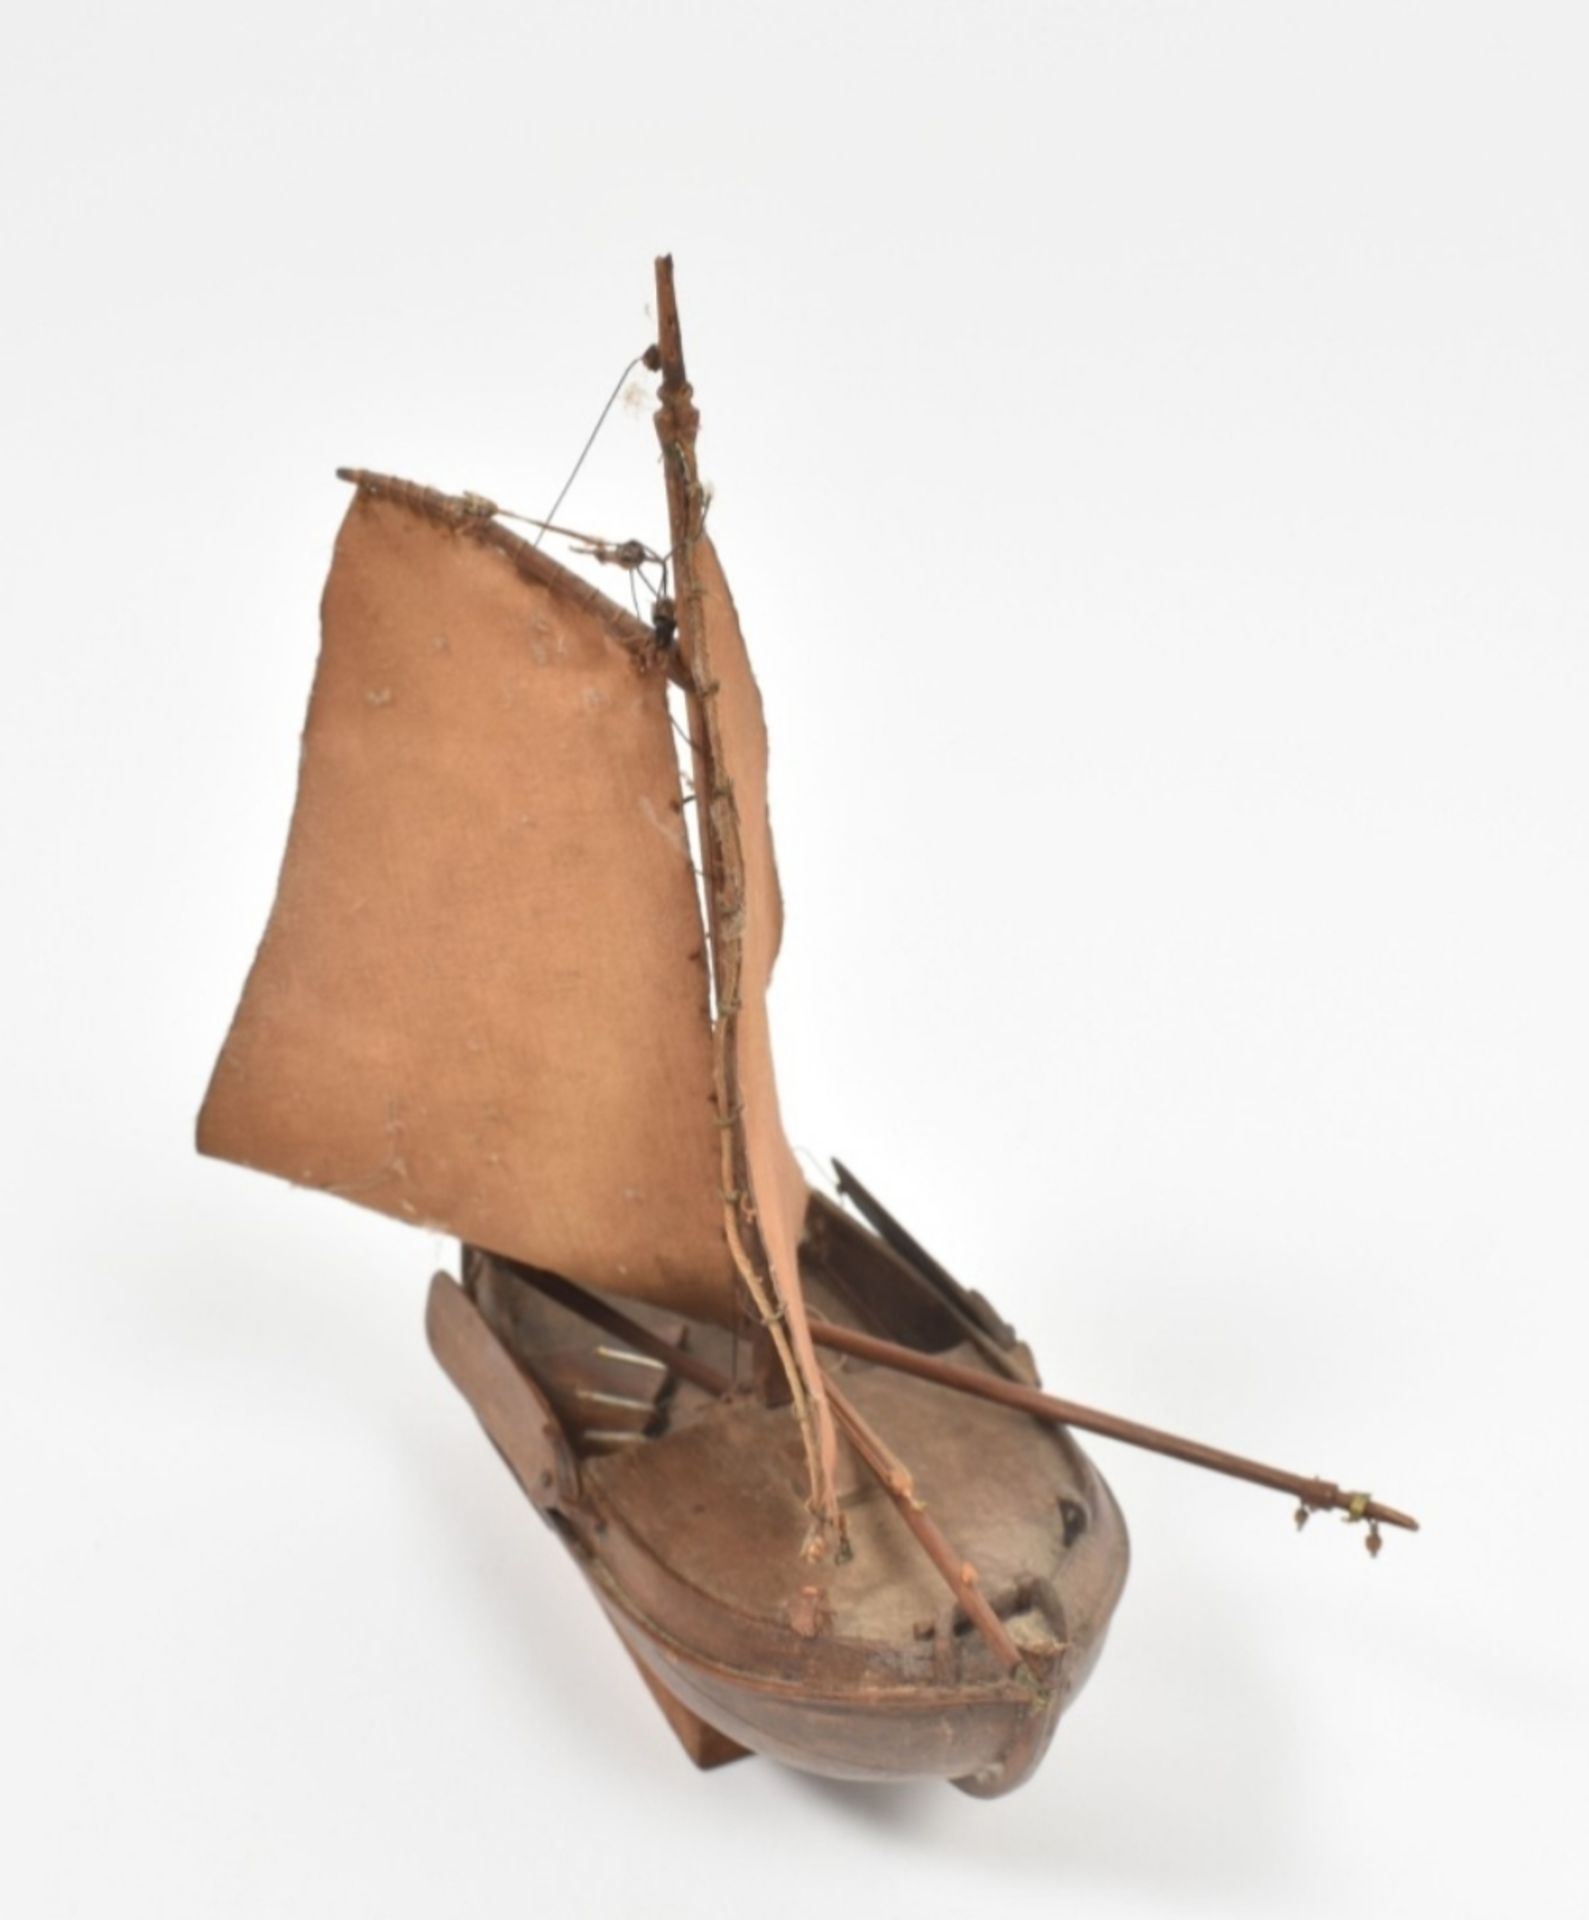 Historic model of a canoe - Image 4 of 9